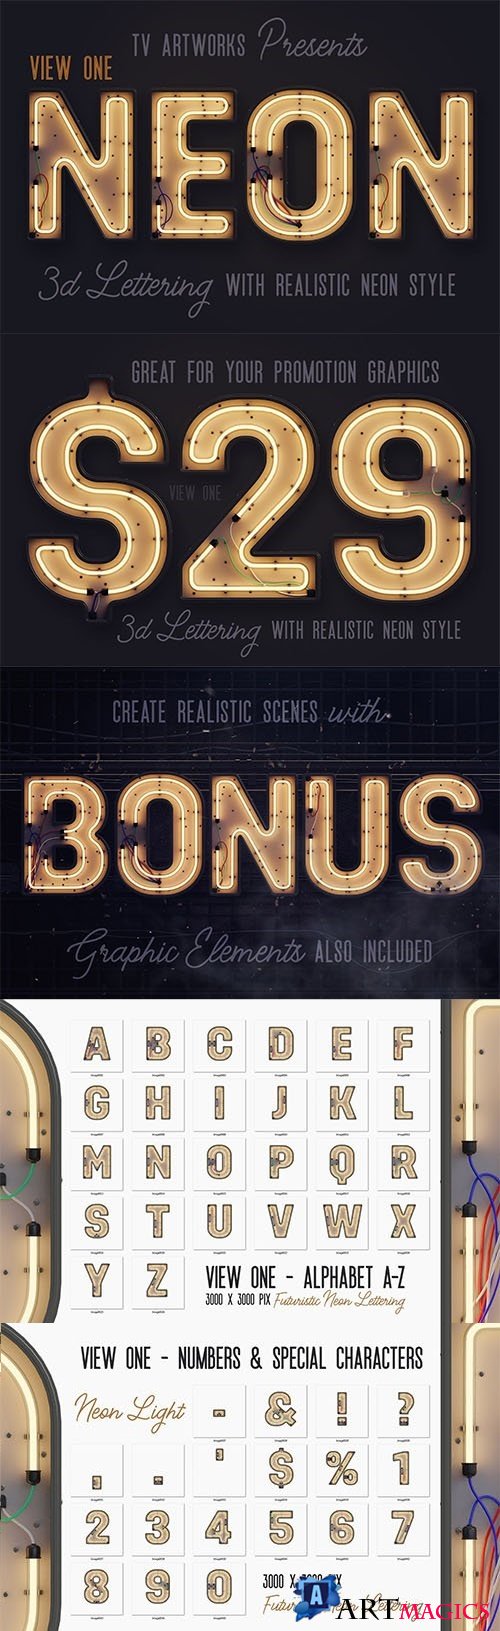 Modern Neon 3D Lettering View 1